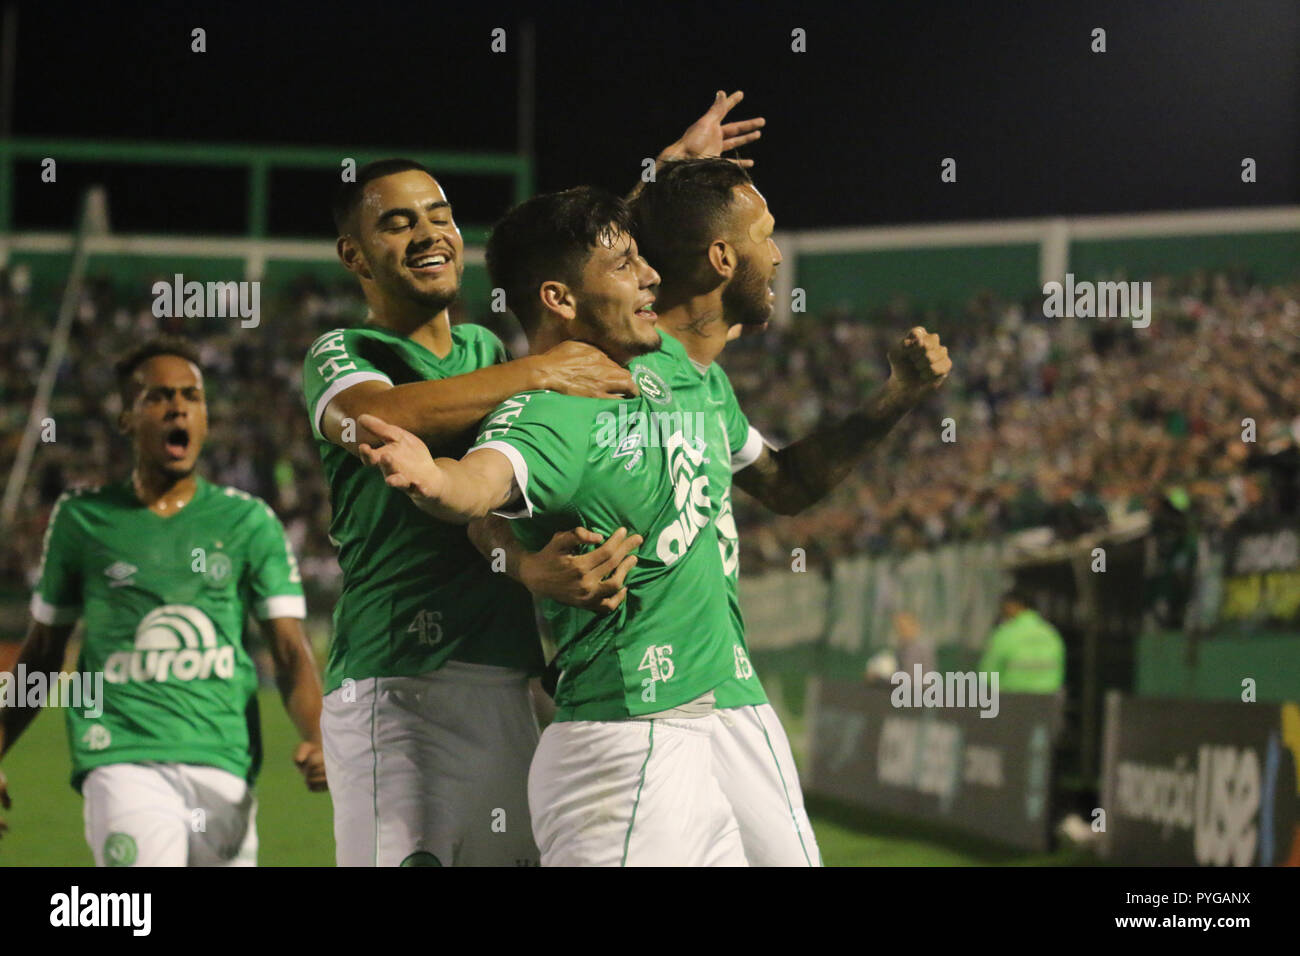 SC Chapecoense celebrates its goal in which it was marked touch in the moe, in the valeu during match against the America-MG in the arena Arena Conda by the Chapecoense - 27/10/2018 - Brazilian A 2018, Chapecoense x Am rica-MG - player Doffo Brazilian championship A 2018. Photo: Renato Padilha / AGIF Stock Photo